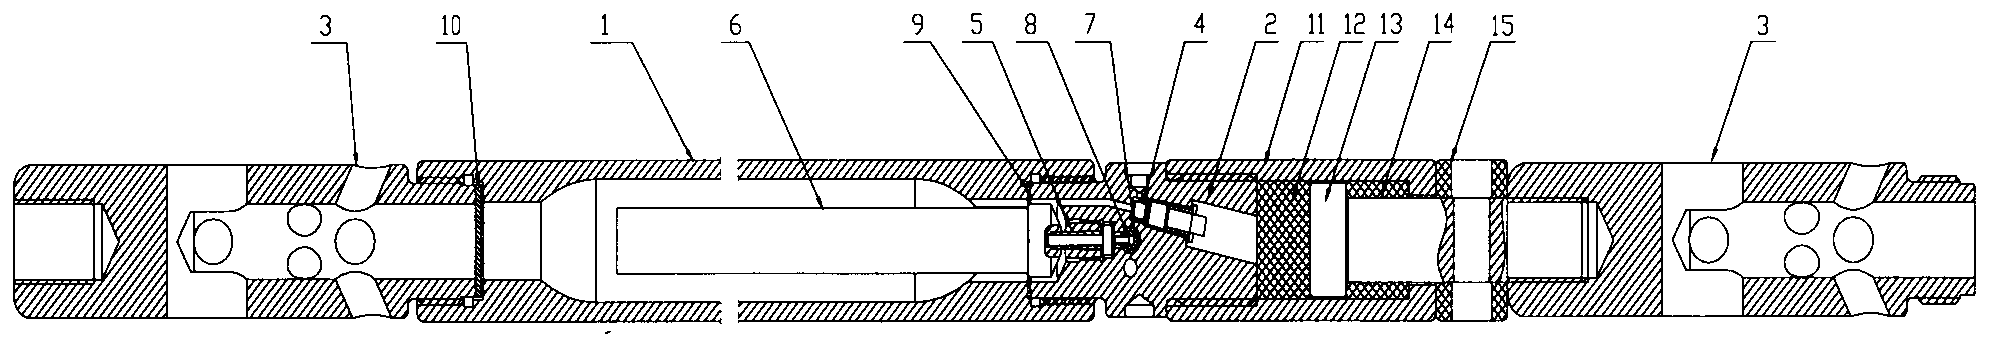 Gaseous phase fracturing device